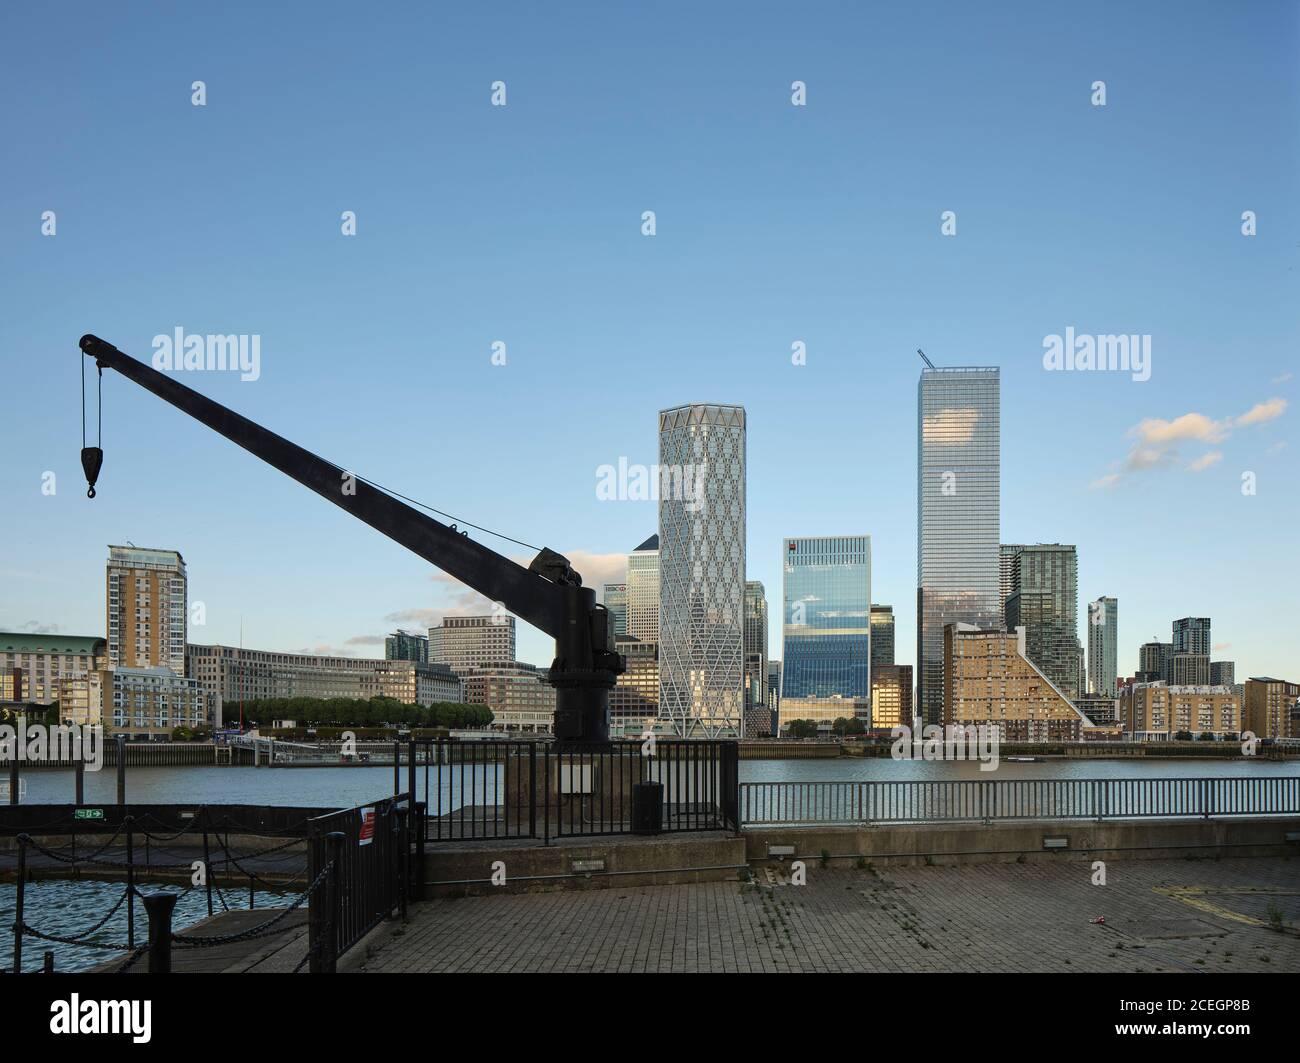 View across river with historic crane in foreground. Newfoundland Tower, London, United Kingdom. Architect: Horden Cherry Lee Architects Ltd, 2020. Stock Photo